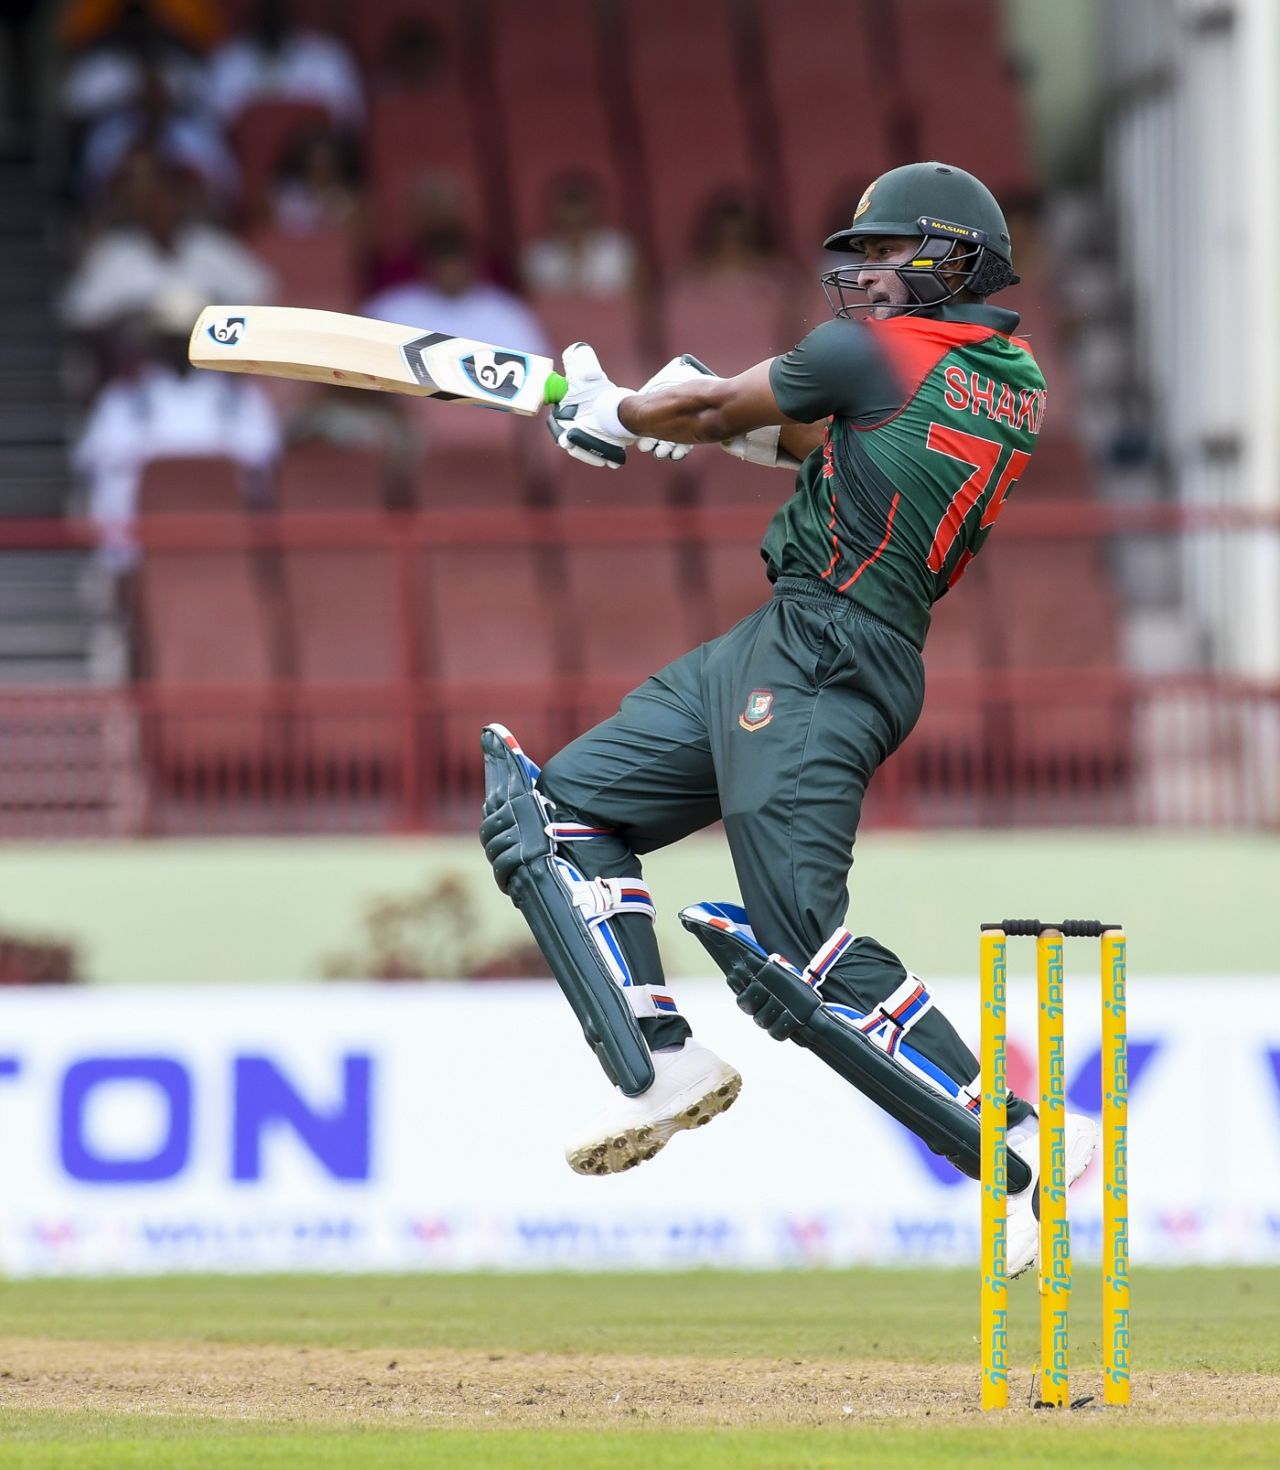 Shakib Al Hasan featured in his second double-century stand in ODIs, West Indies v Bangladesh, 1st ODI, Guyana, July 22, 2018